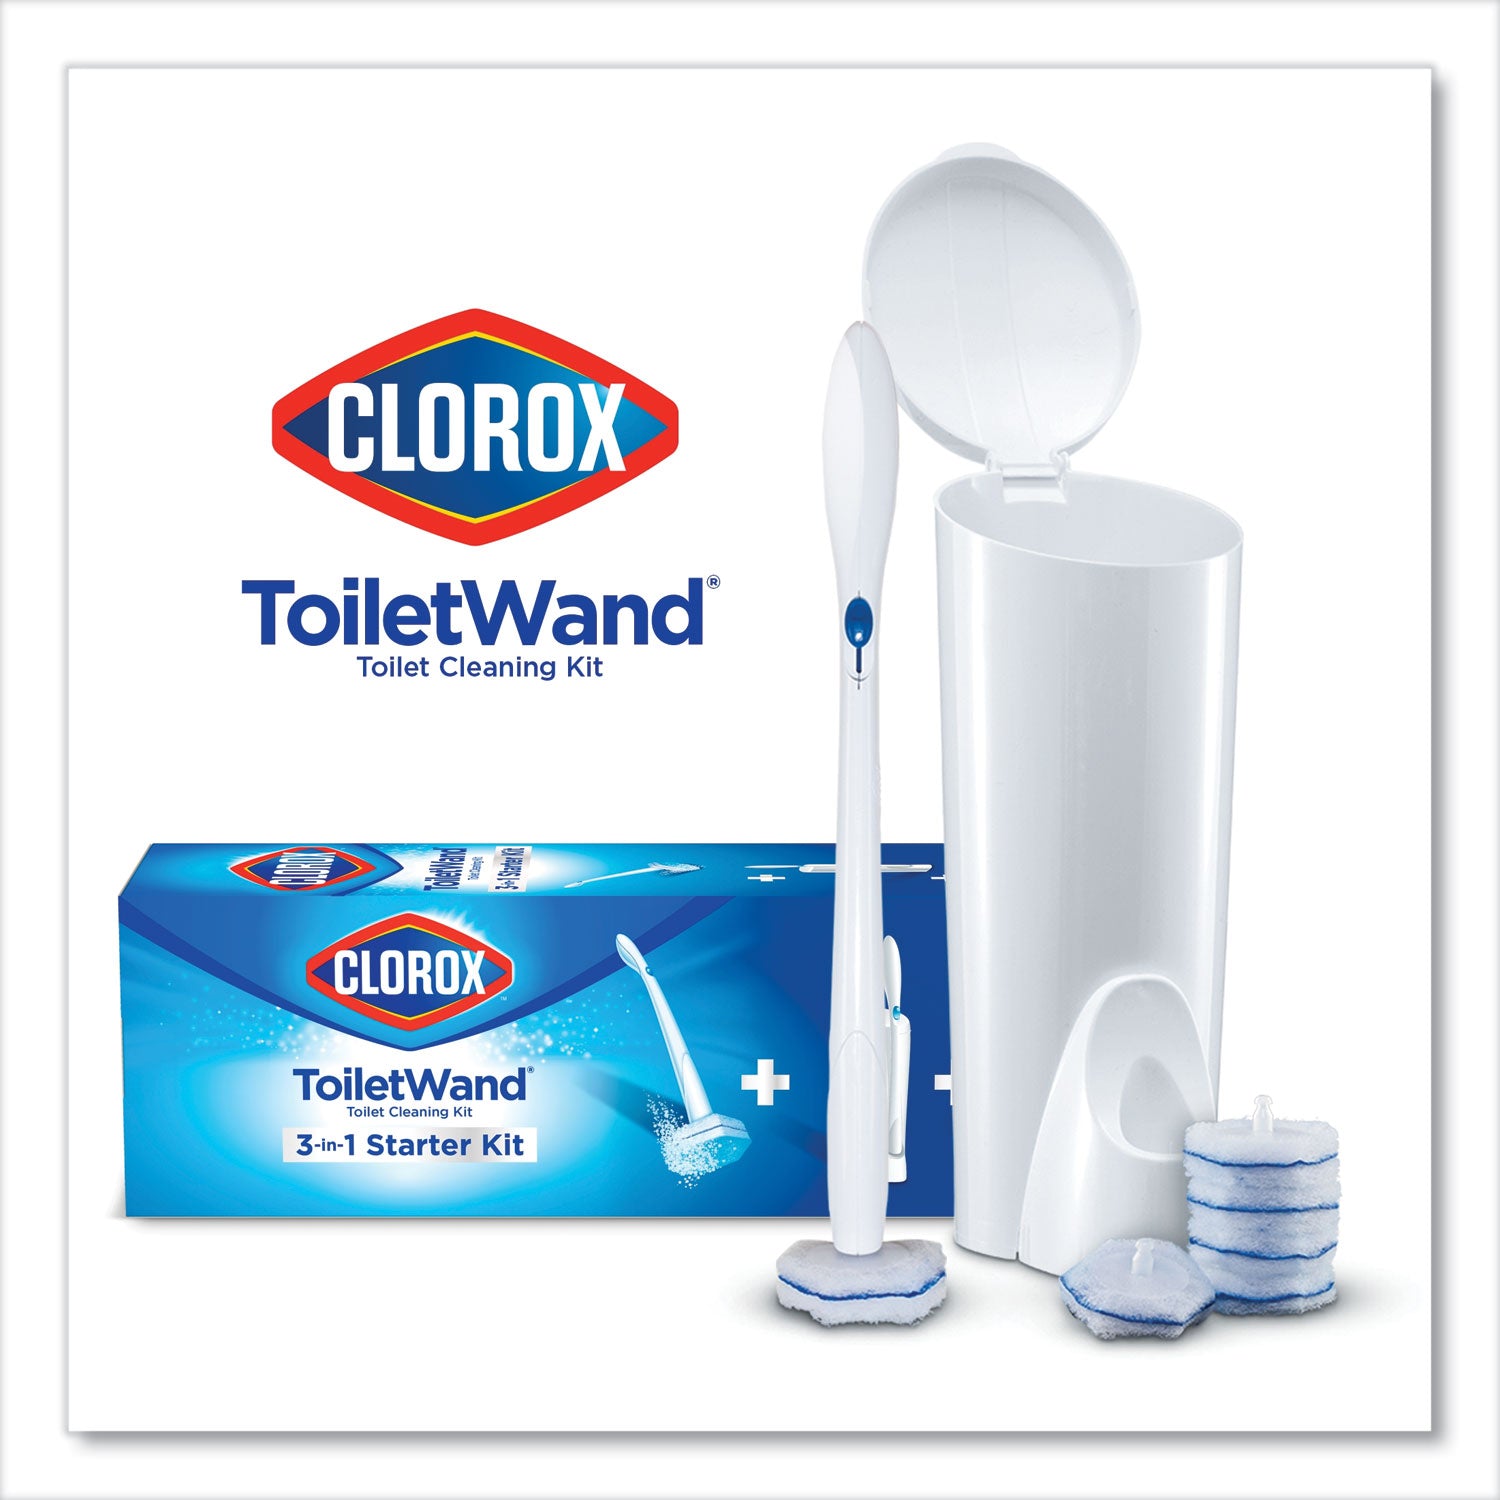 ToiletWand Disposable Toilet Cleaning System: Handle, Caddy and Refills, White, 6/Carton - 